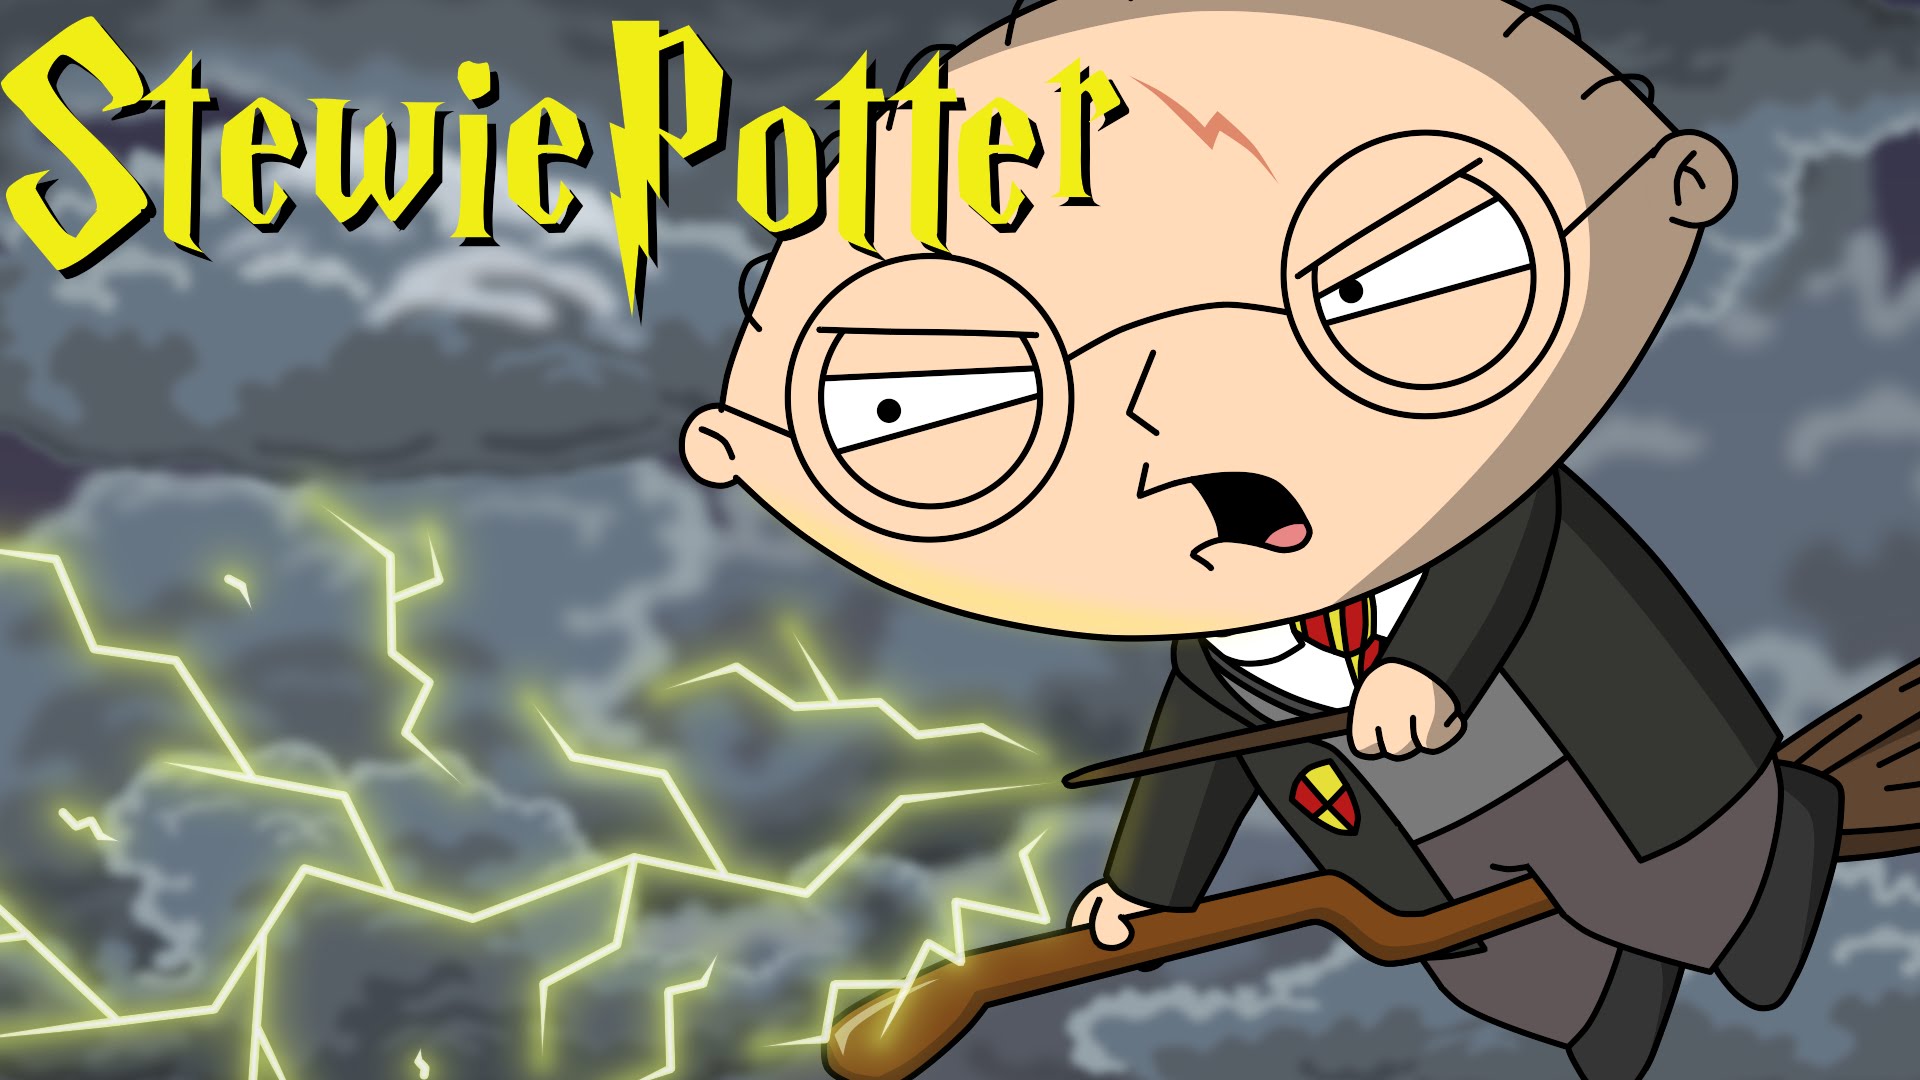 Stewie Potter, A Magical Animated Parody of Family Guy and Harry Potter